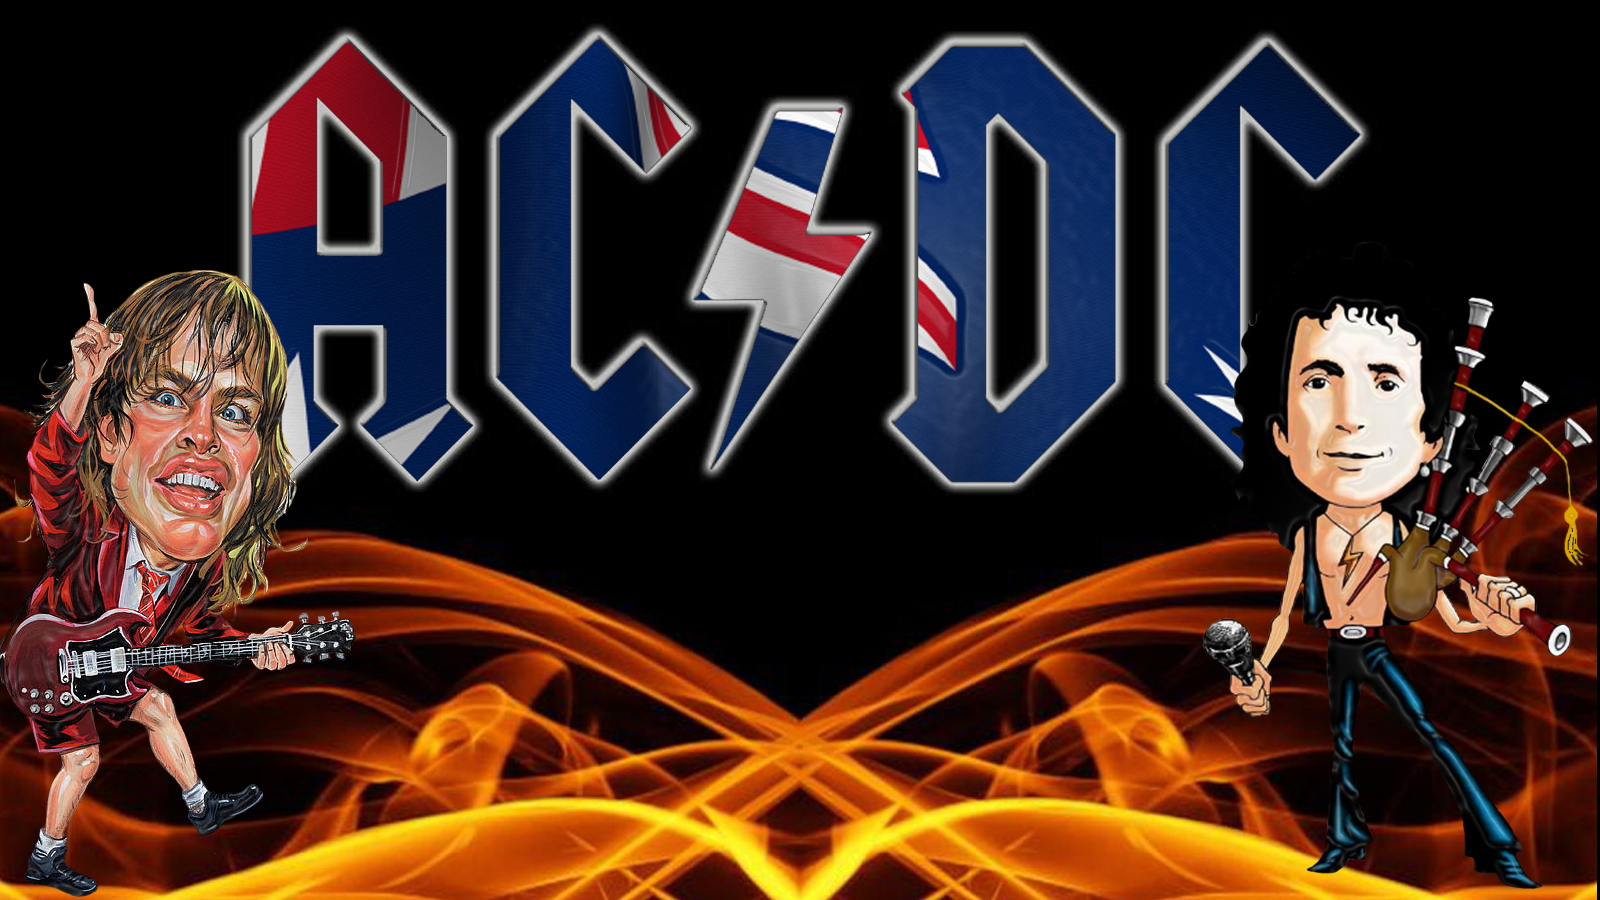 ACDC Wallpaper and Background 1600x900 ID277142